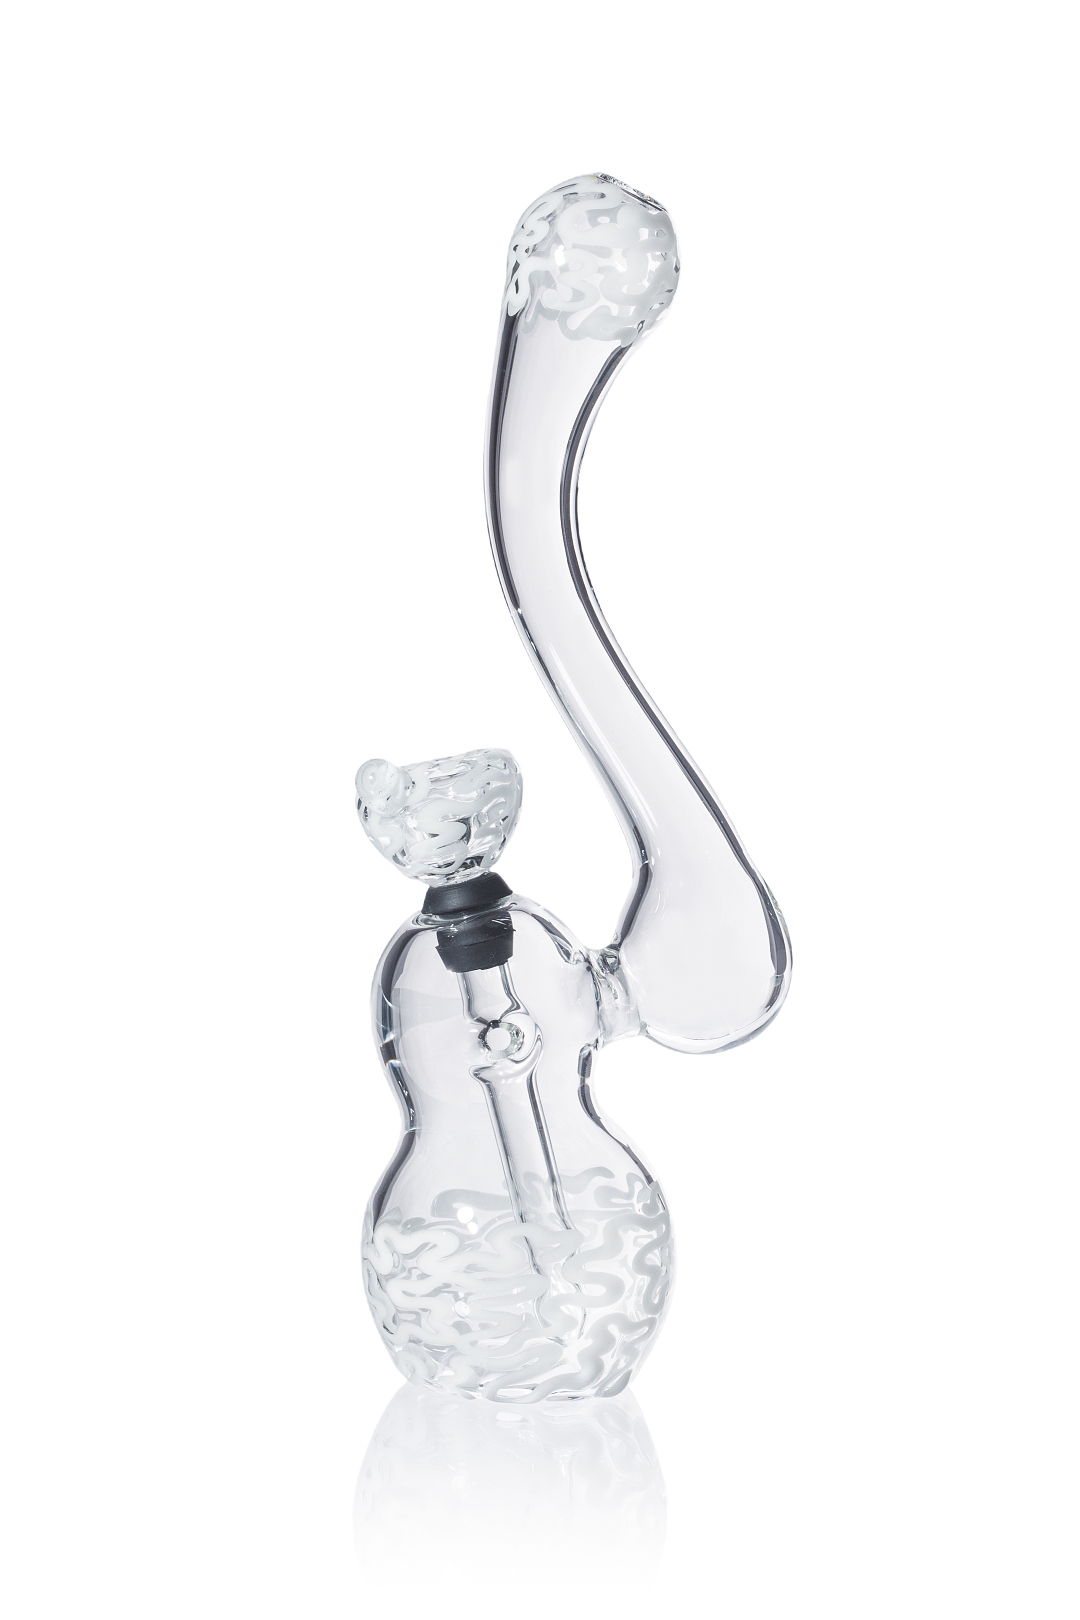 Bubblers For Sale - Weed Bubblers and Mini Bubblers